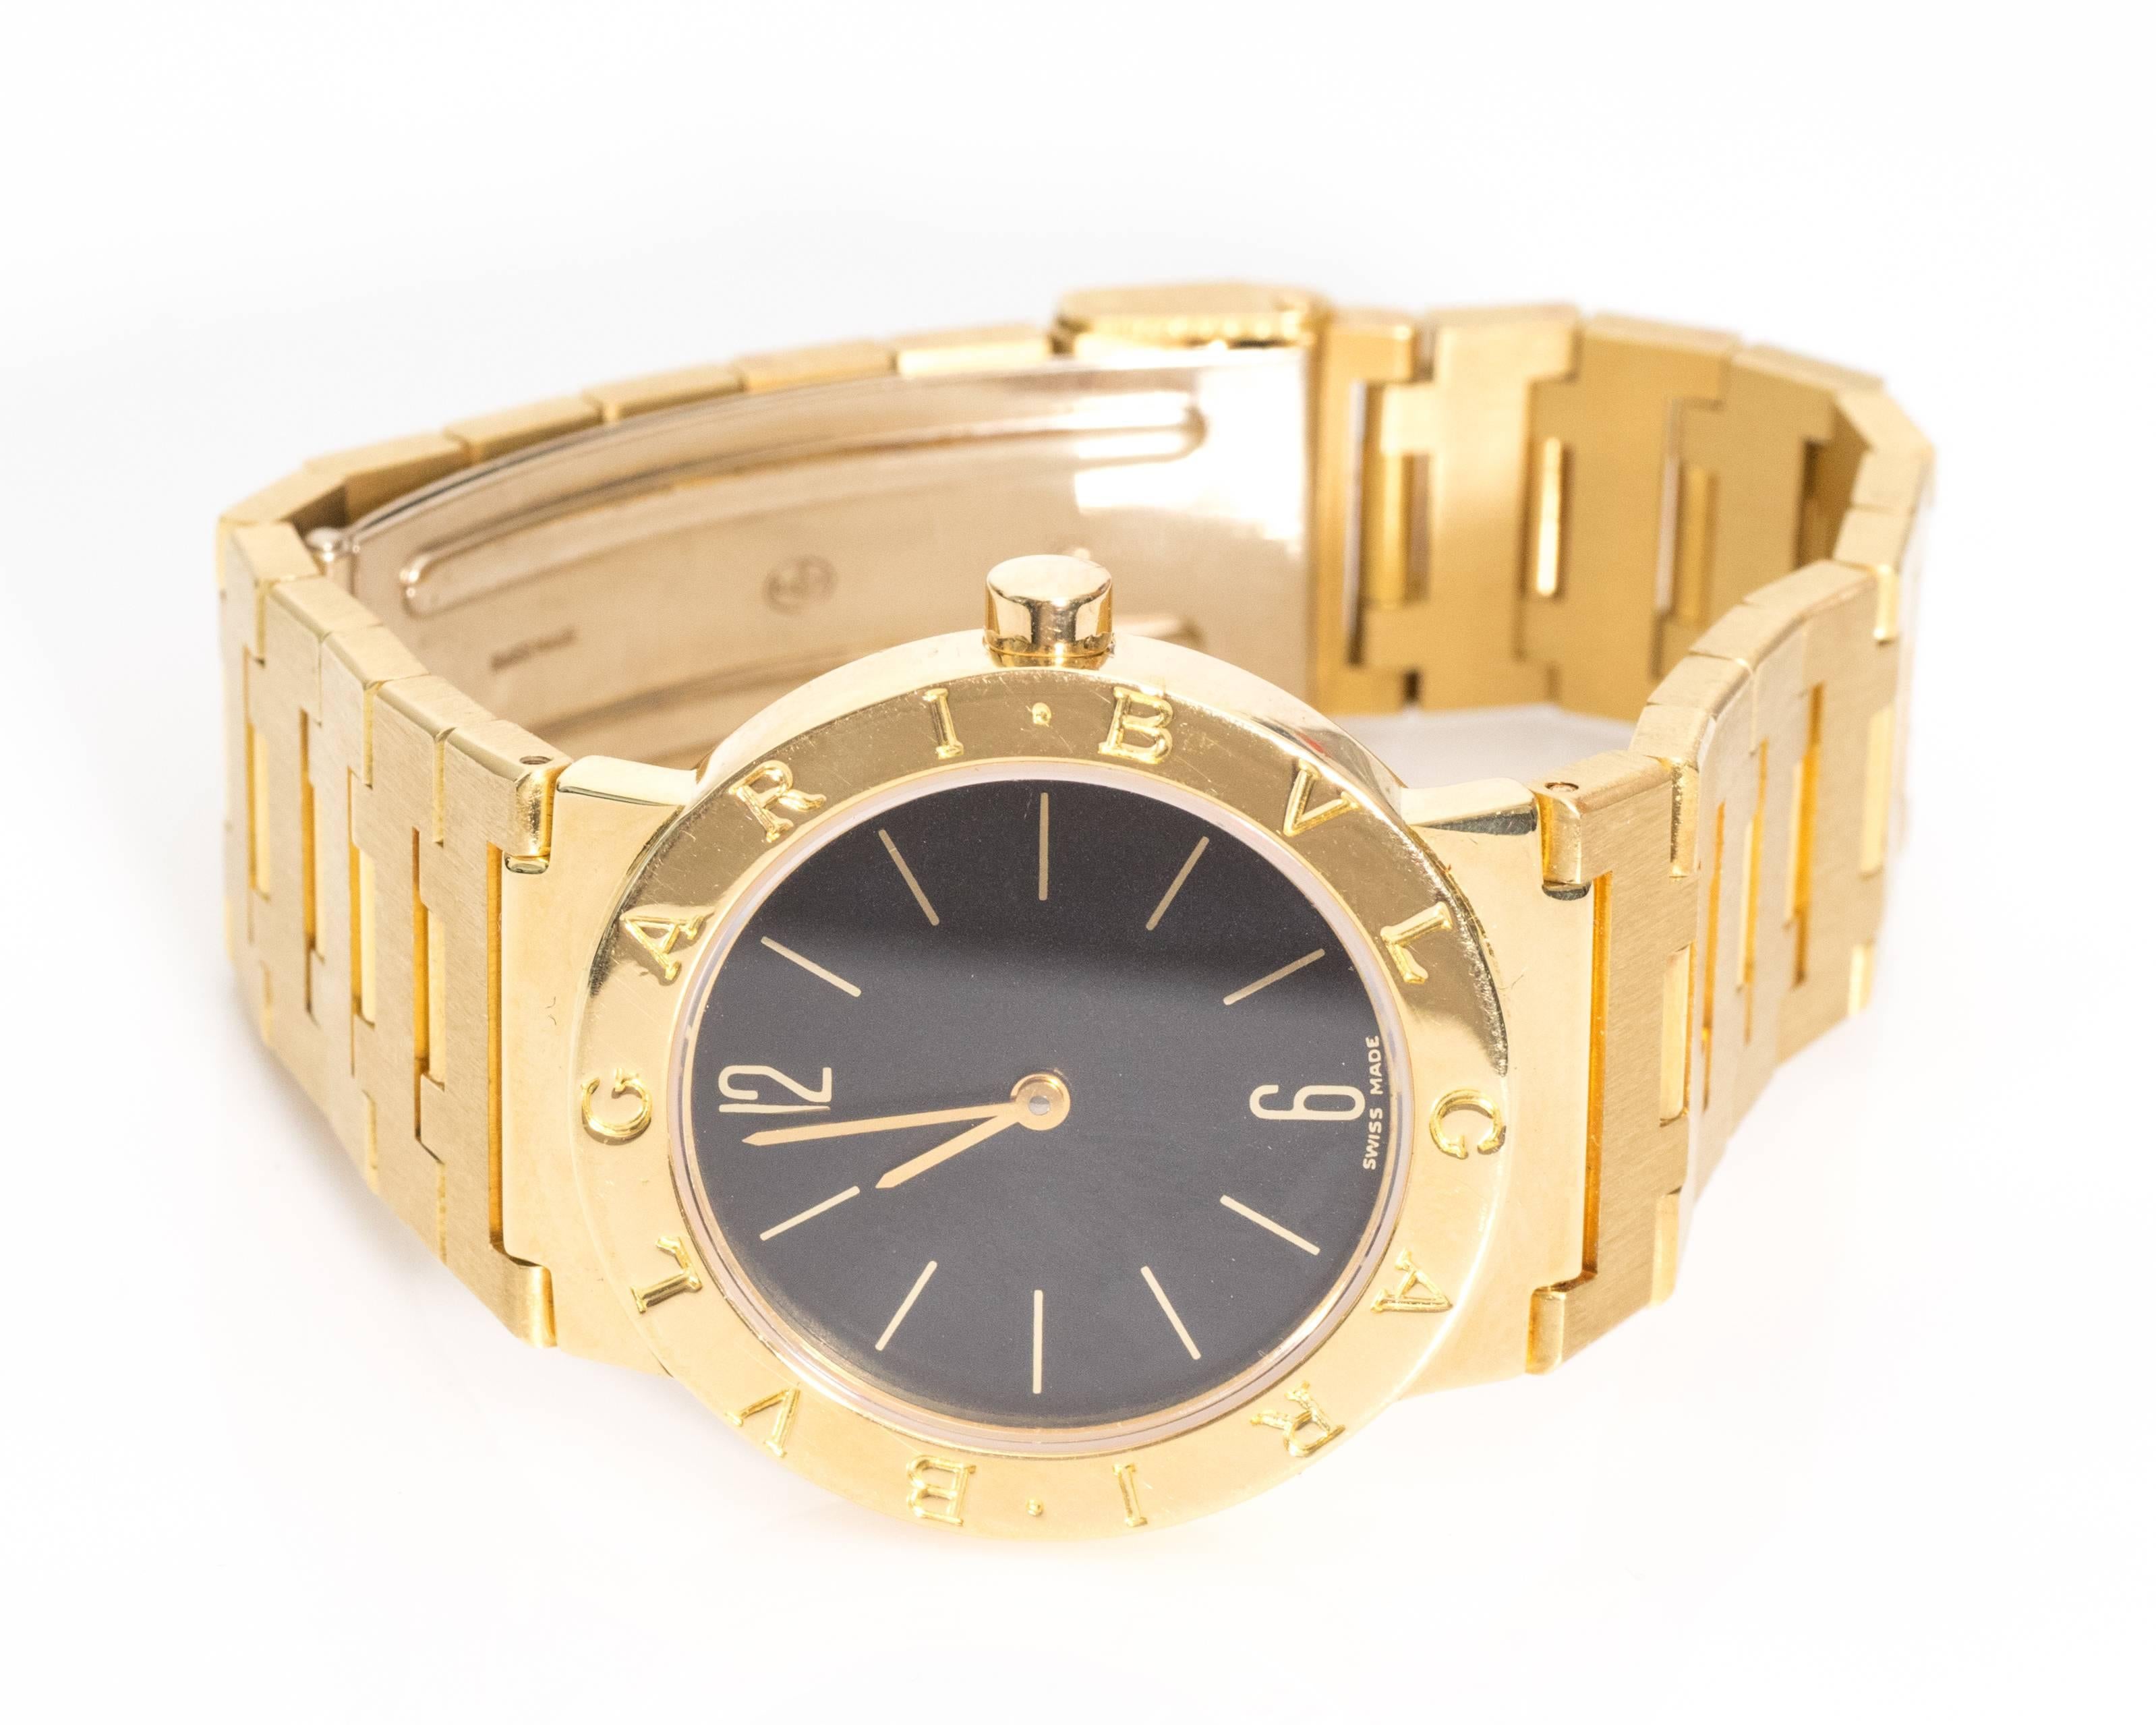 Bulgari 18 Karat Yellow Gold Ladies Bulgari Wrist watch 
Swiss Made
Fits up to a 7.15 inch Wrist
Accompanied with Original Box and 4 Removable Links 

Features:
12-Hour Dial
Movement
Analog Display
23 Millimeter Case Size

